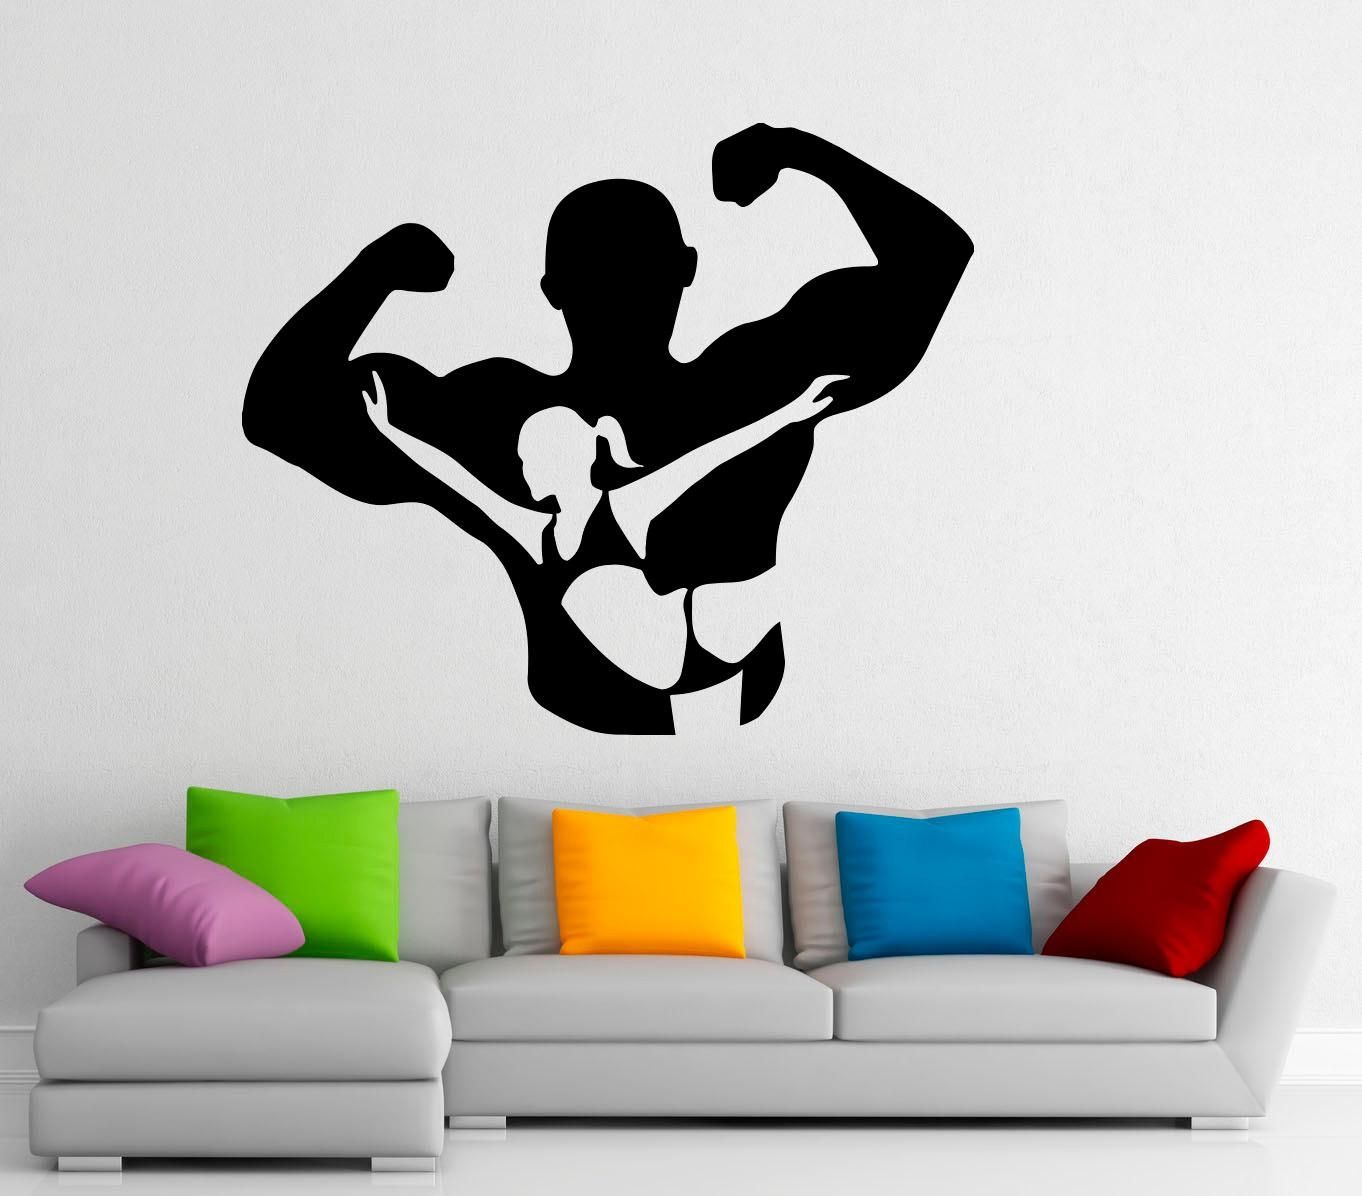 Gym Wall Decal Fitness Wall Stickers Sports Interior Bedroom In Wall Art For Home Gym (View 7 of 20)